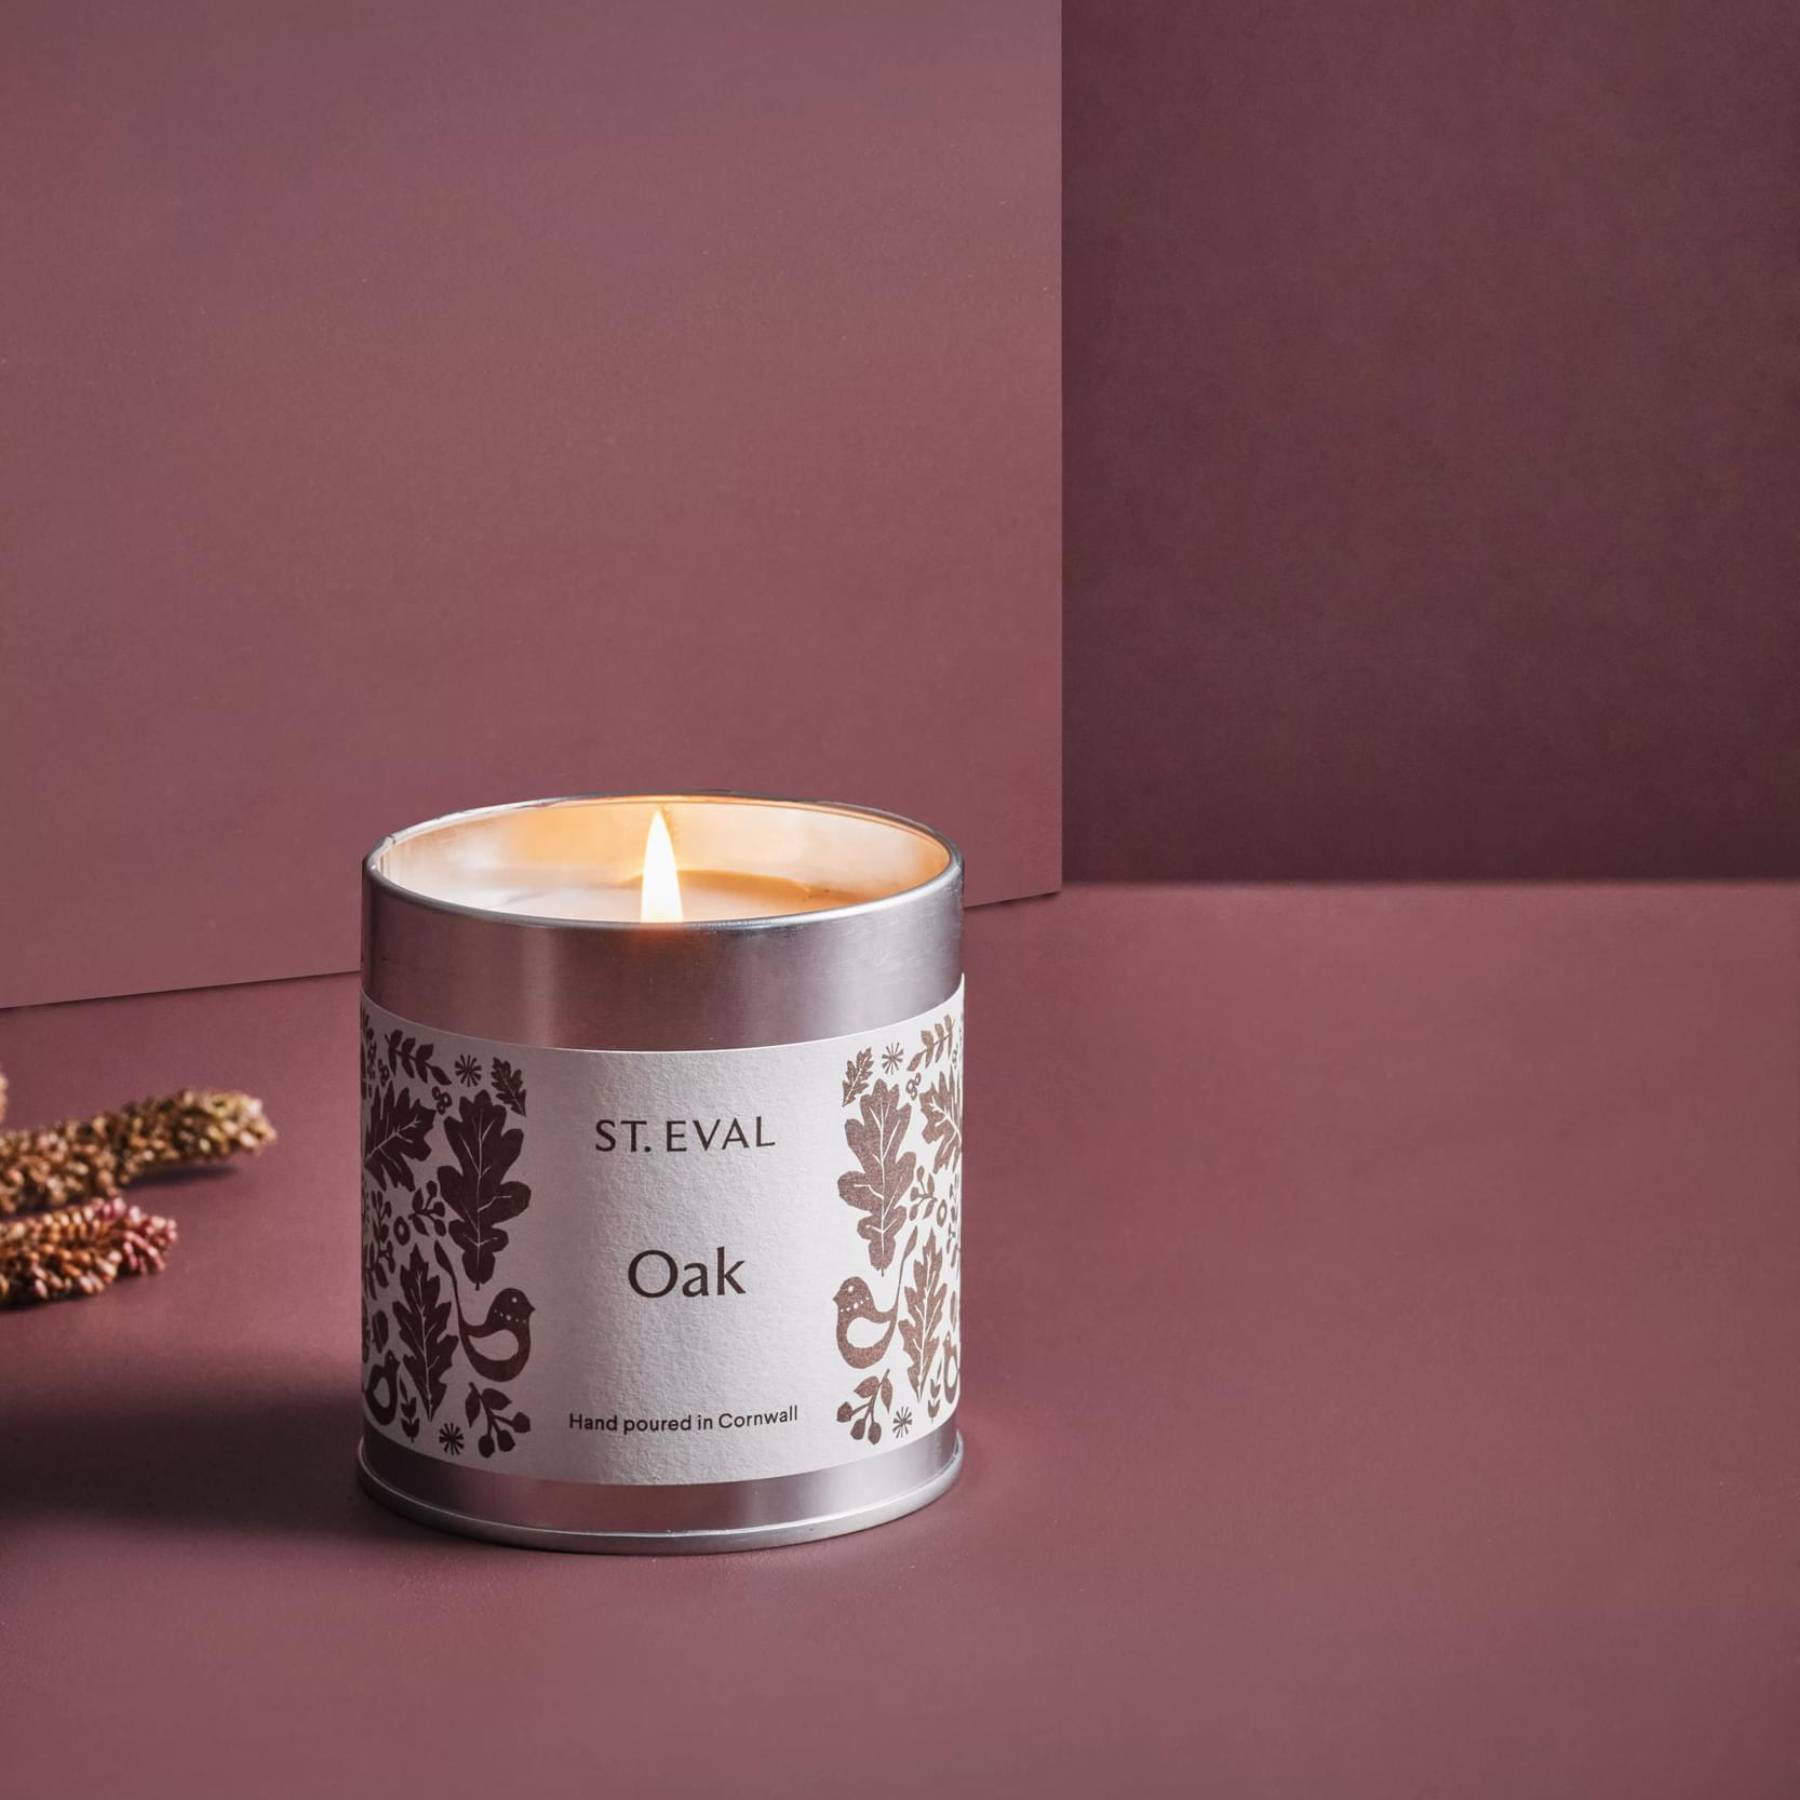 Oak scented tin candle